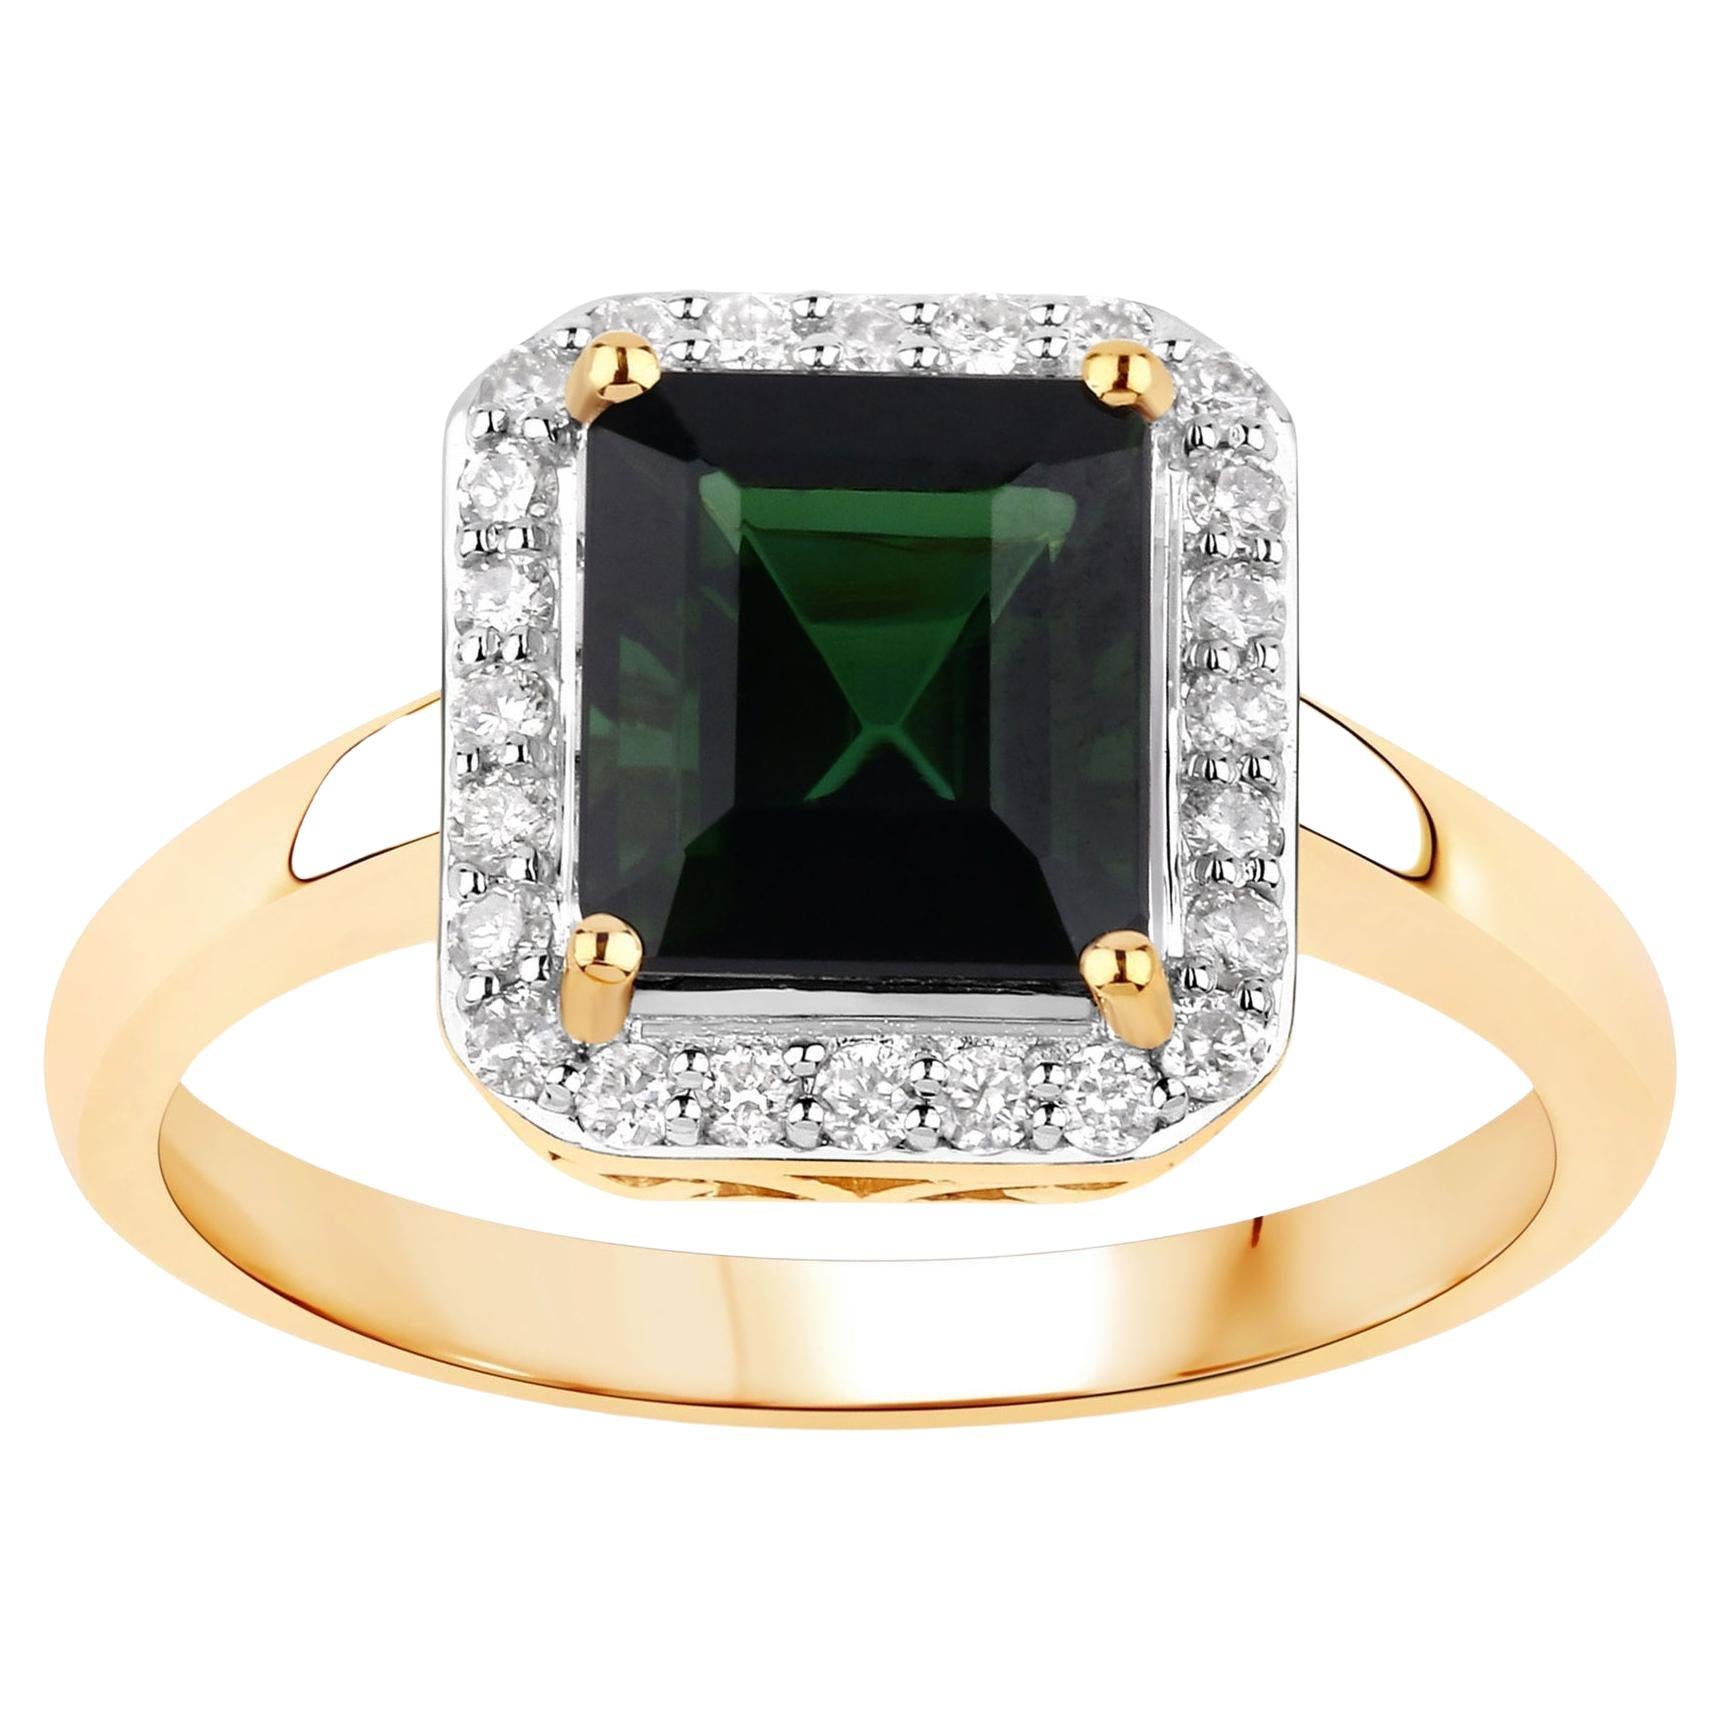 Green Tourmaline Ring With Diamonds 3.02 Carats 14K Yellow Gold For Sale